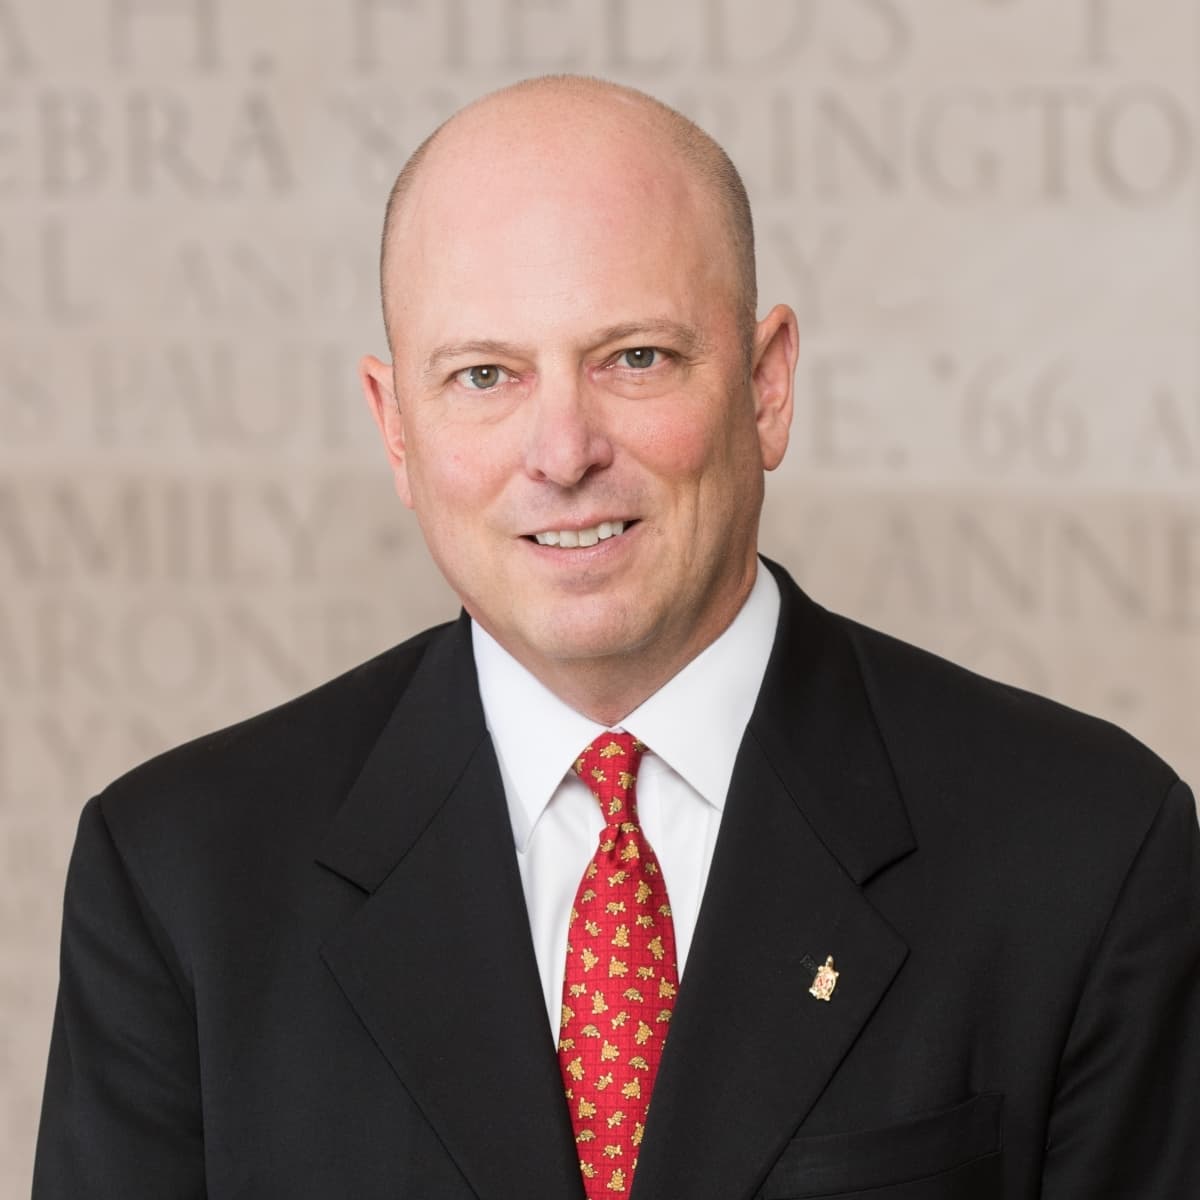 Formal portrait of Jim Spencer in a dark suit, red tie, and testudo turtle lapel pin